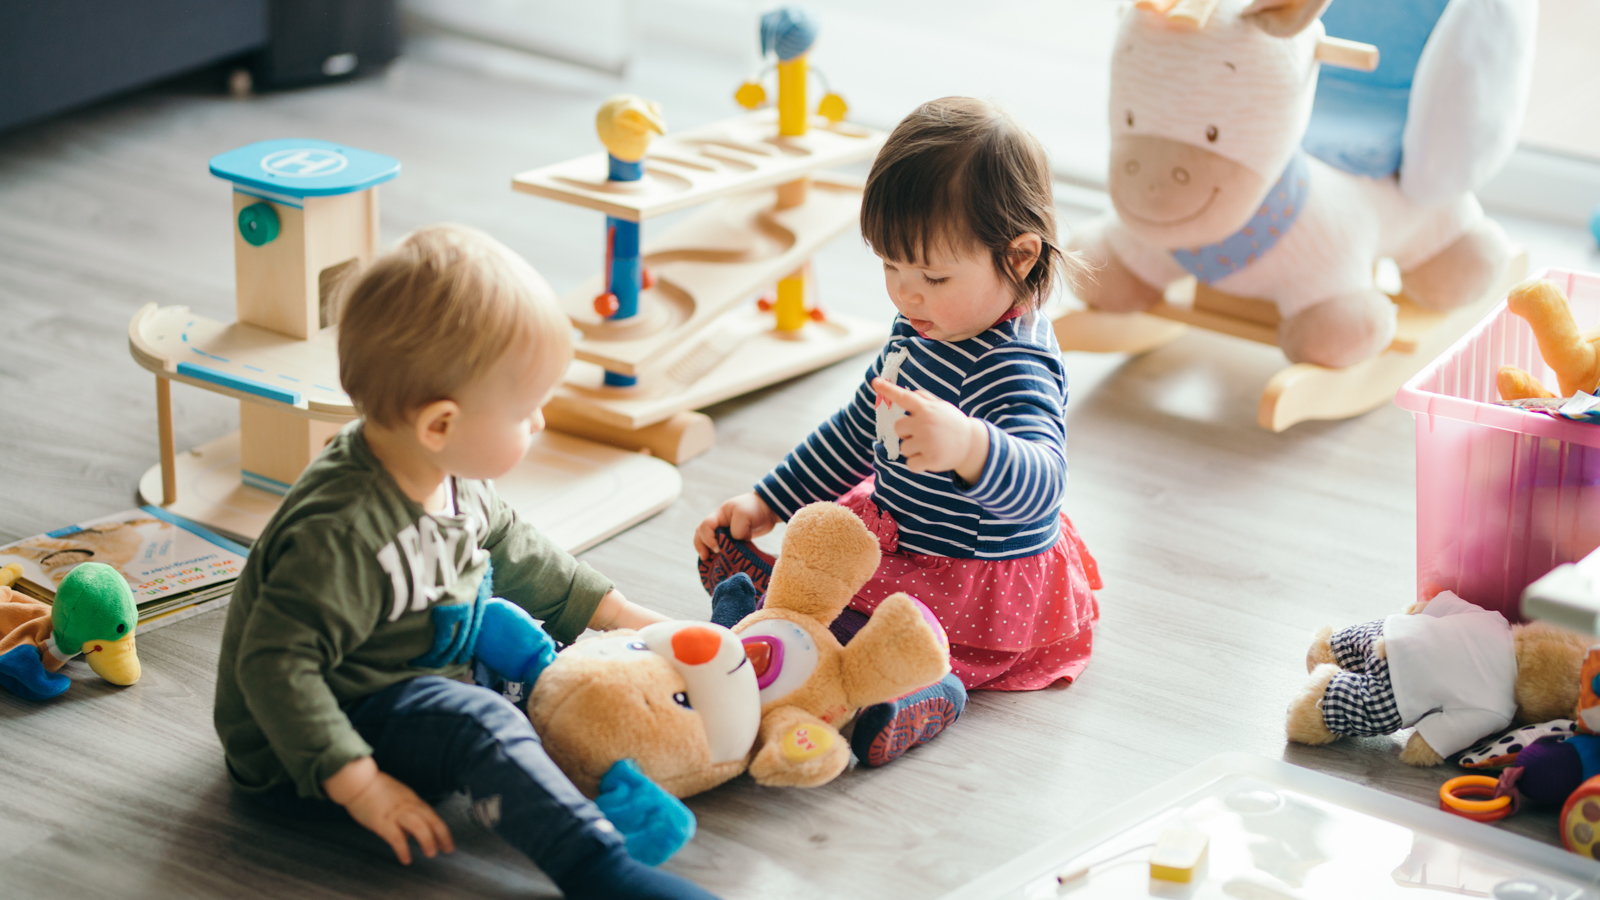 children playing with toys